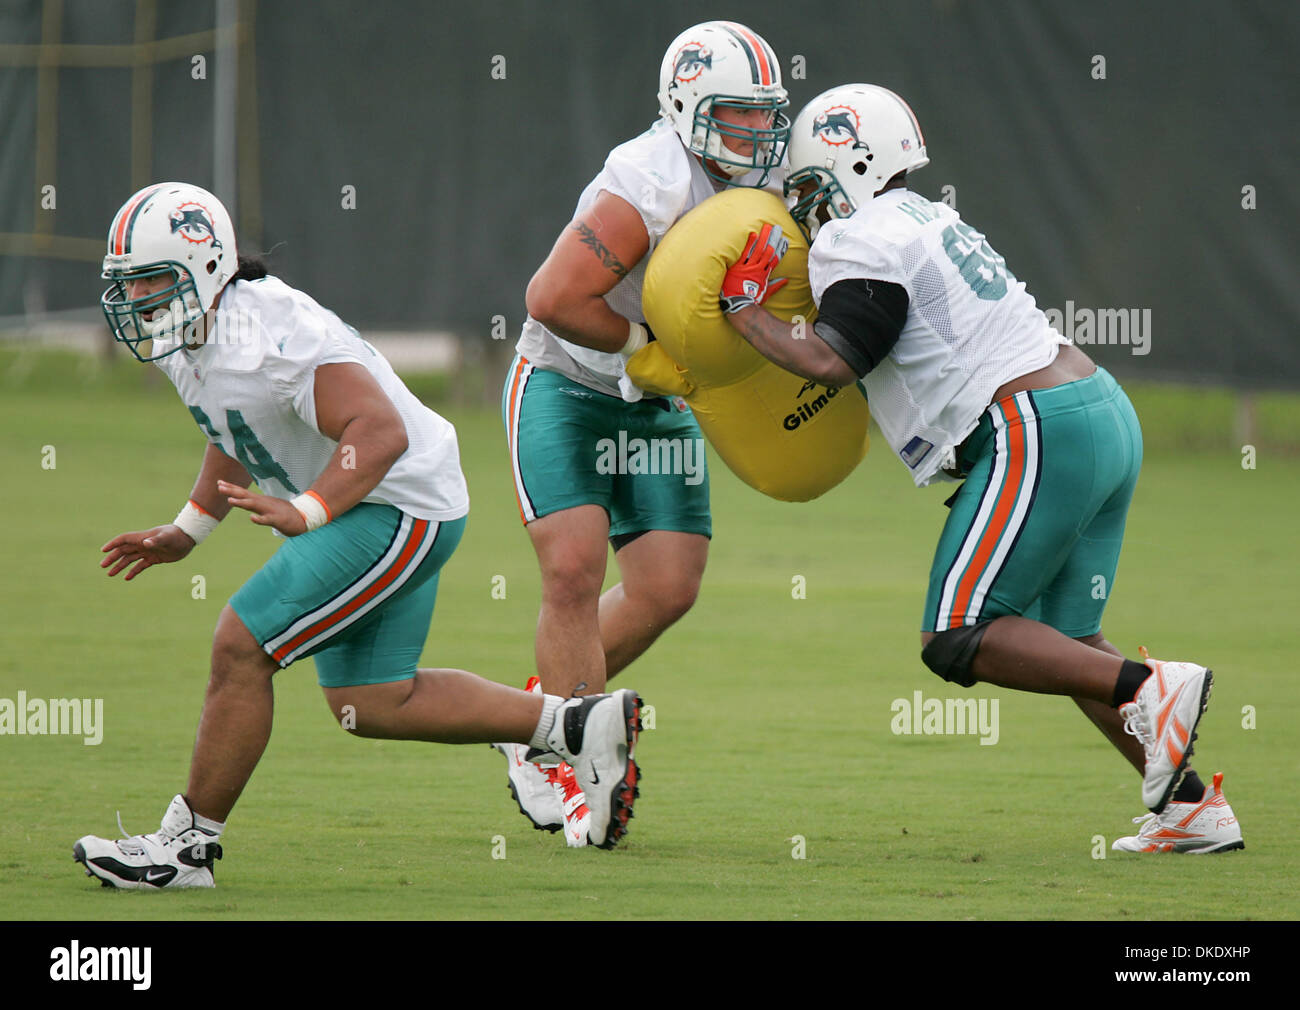 Jun 08, 2007 - Davie, FL, USA - Offensive linemen (l to r) #64 SAMSON SATELE, #77 DREW MORMINO and #66 REX HADNOT practice a blocking drill at Dolphins mini camp. (Credit Image: © Allen Eyestone/Palm Beach Post/ZUMA Press) RESTRICTIONS: USA Tabloid RIGHTS OUT! Stock Photo